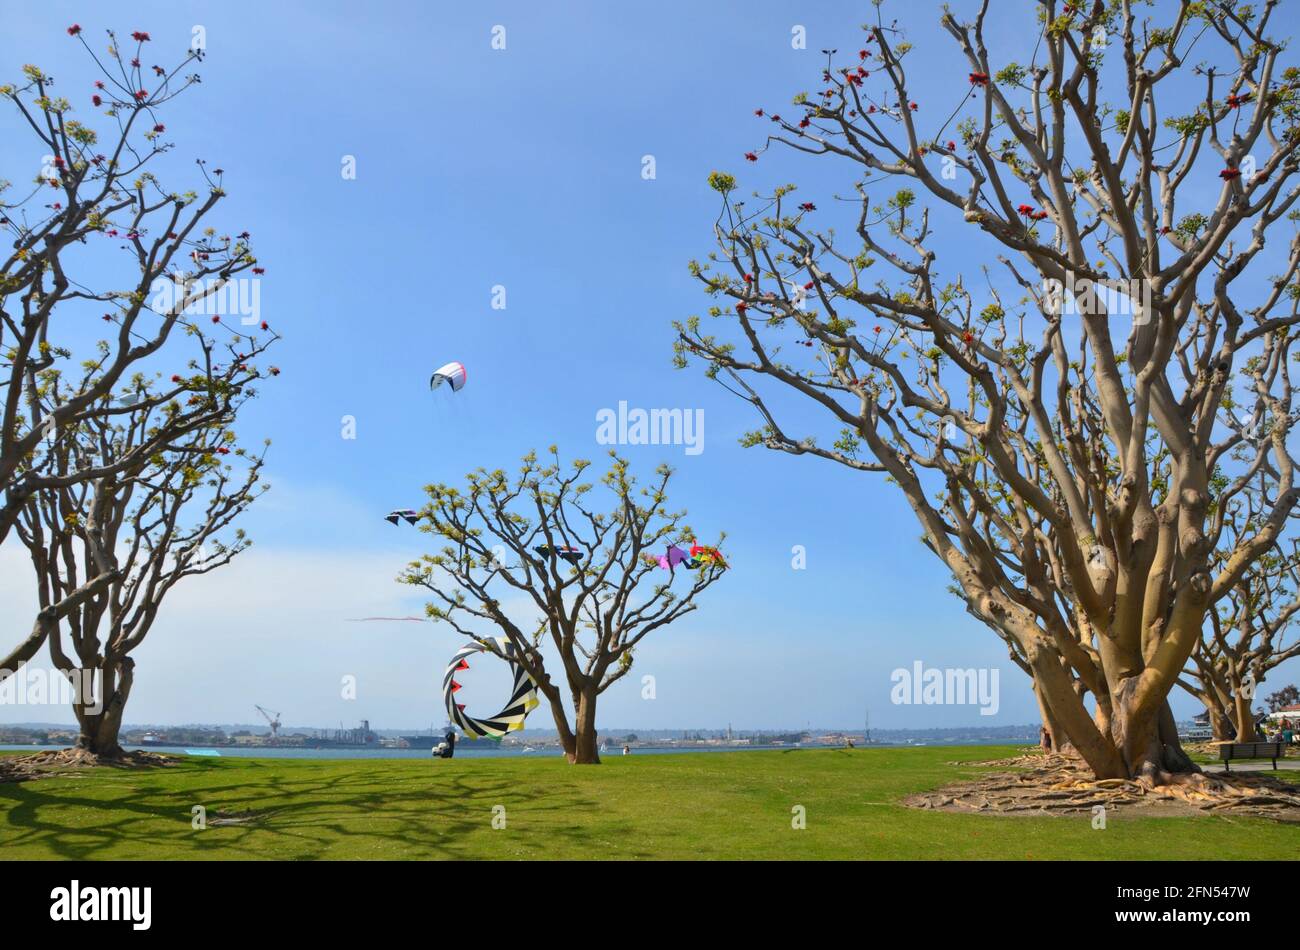 Kite flying with scenic view of the Seaport Village coral trees on Kettner Boulevard at the San Diego Embarcadero Marina Park in California, USA. Stock Photo